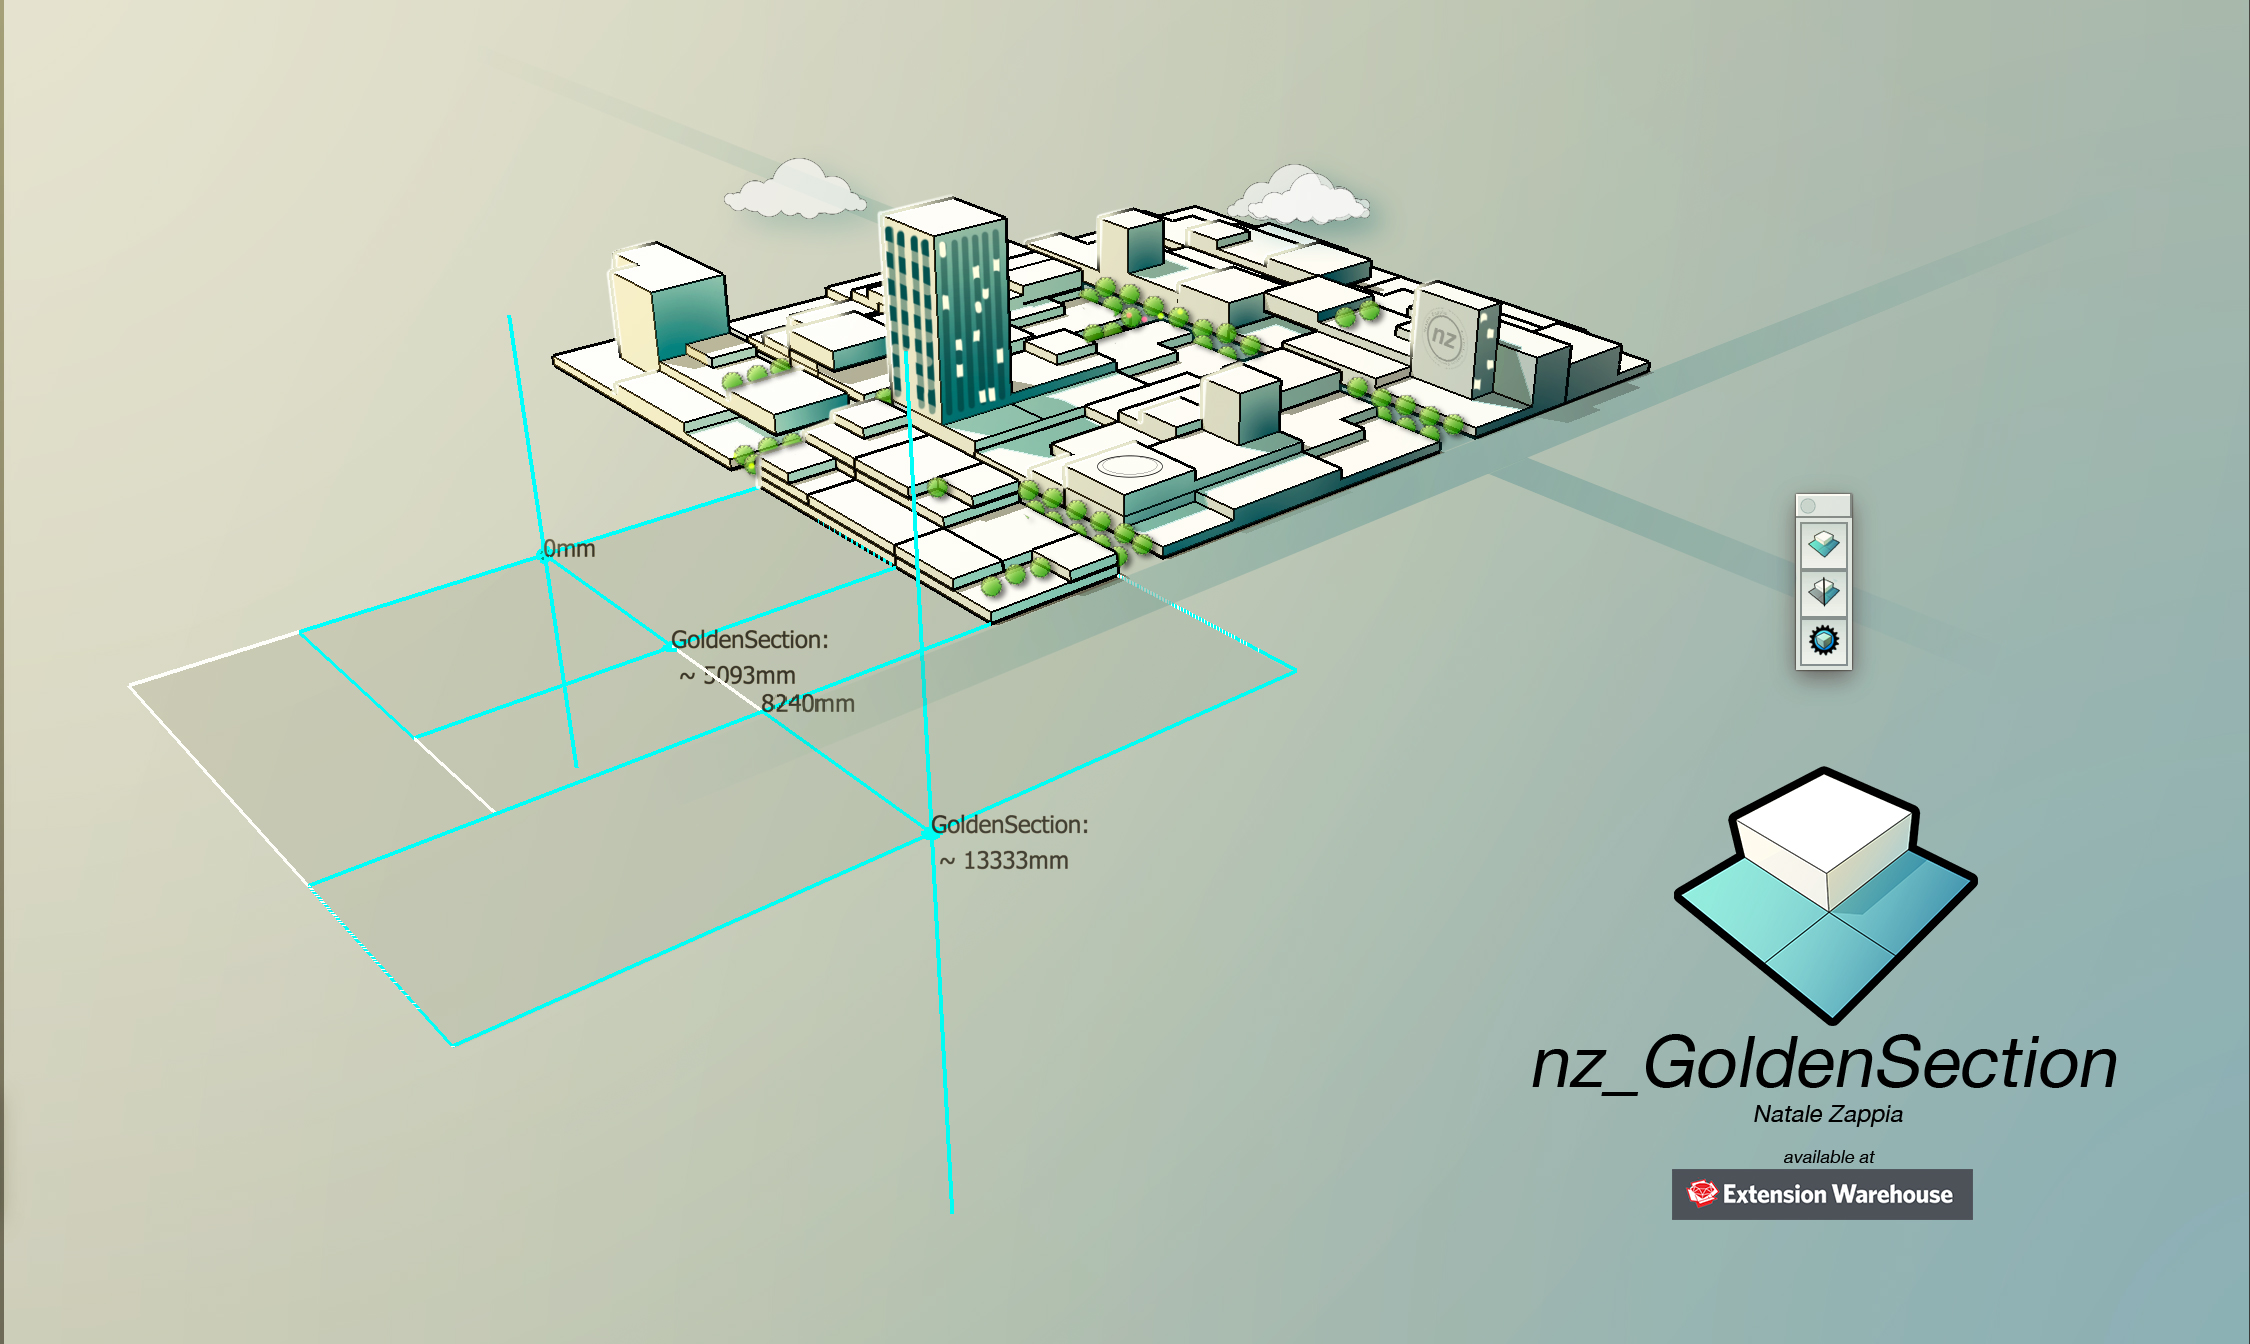 nz_GoldenSection